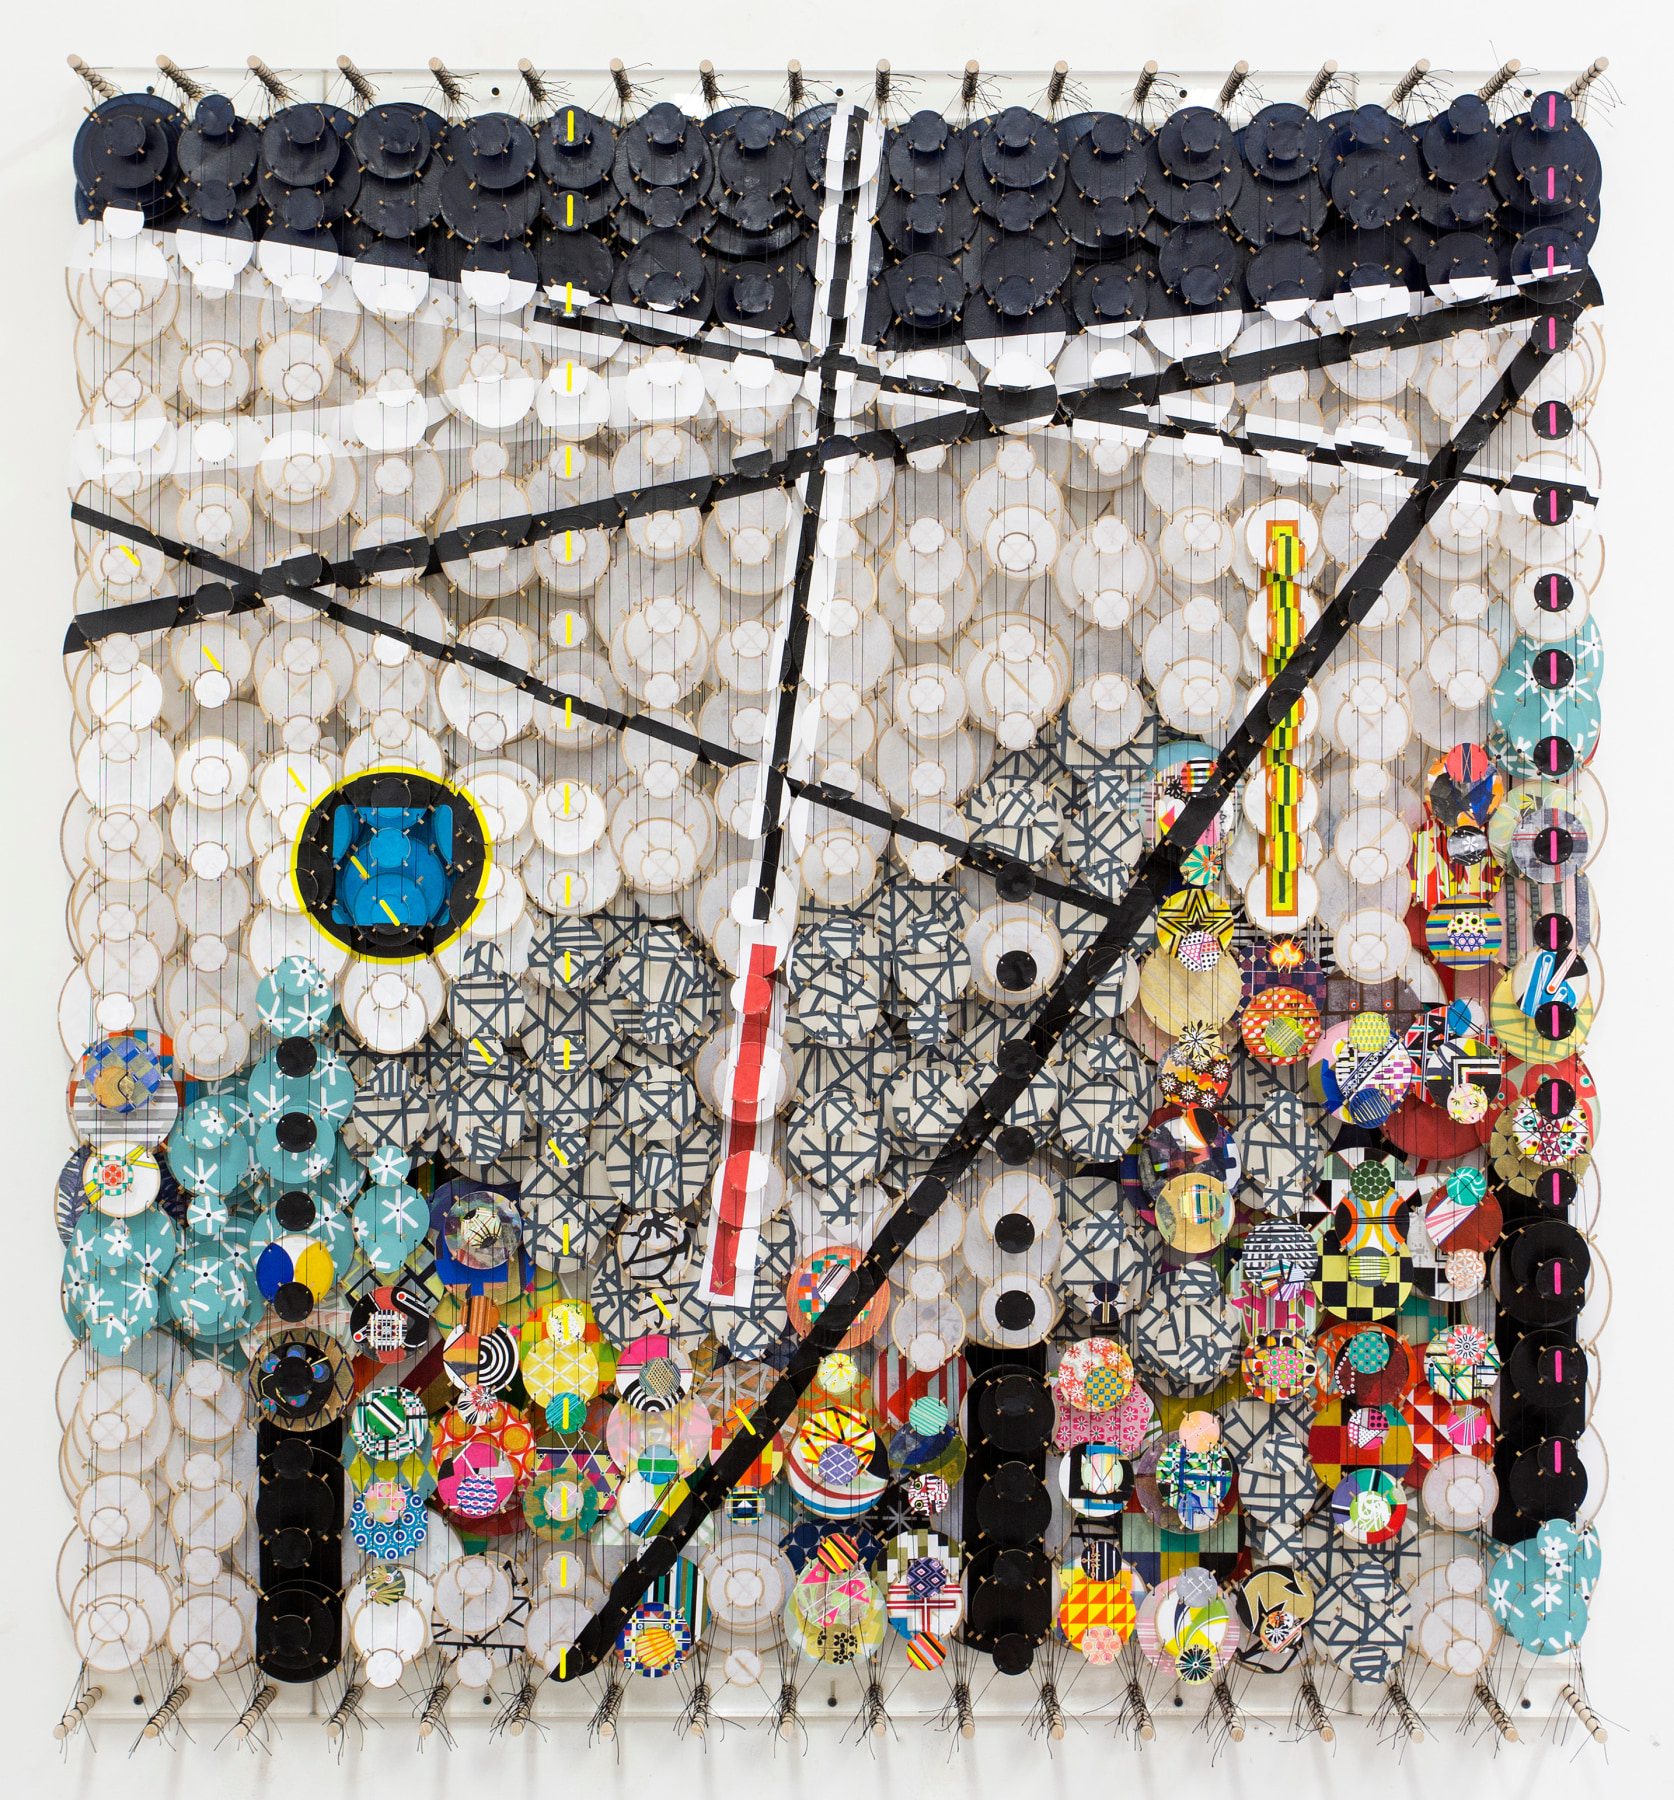 Jacob Hashimoto Impossible Barriers to the Cosmos, Logical and Absolute, 2016